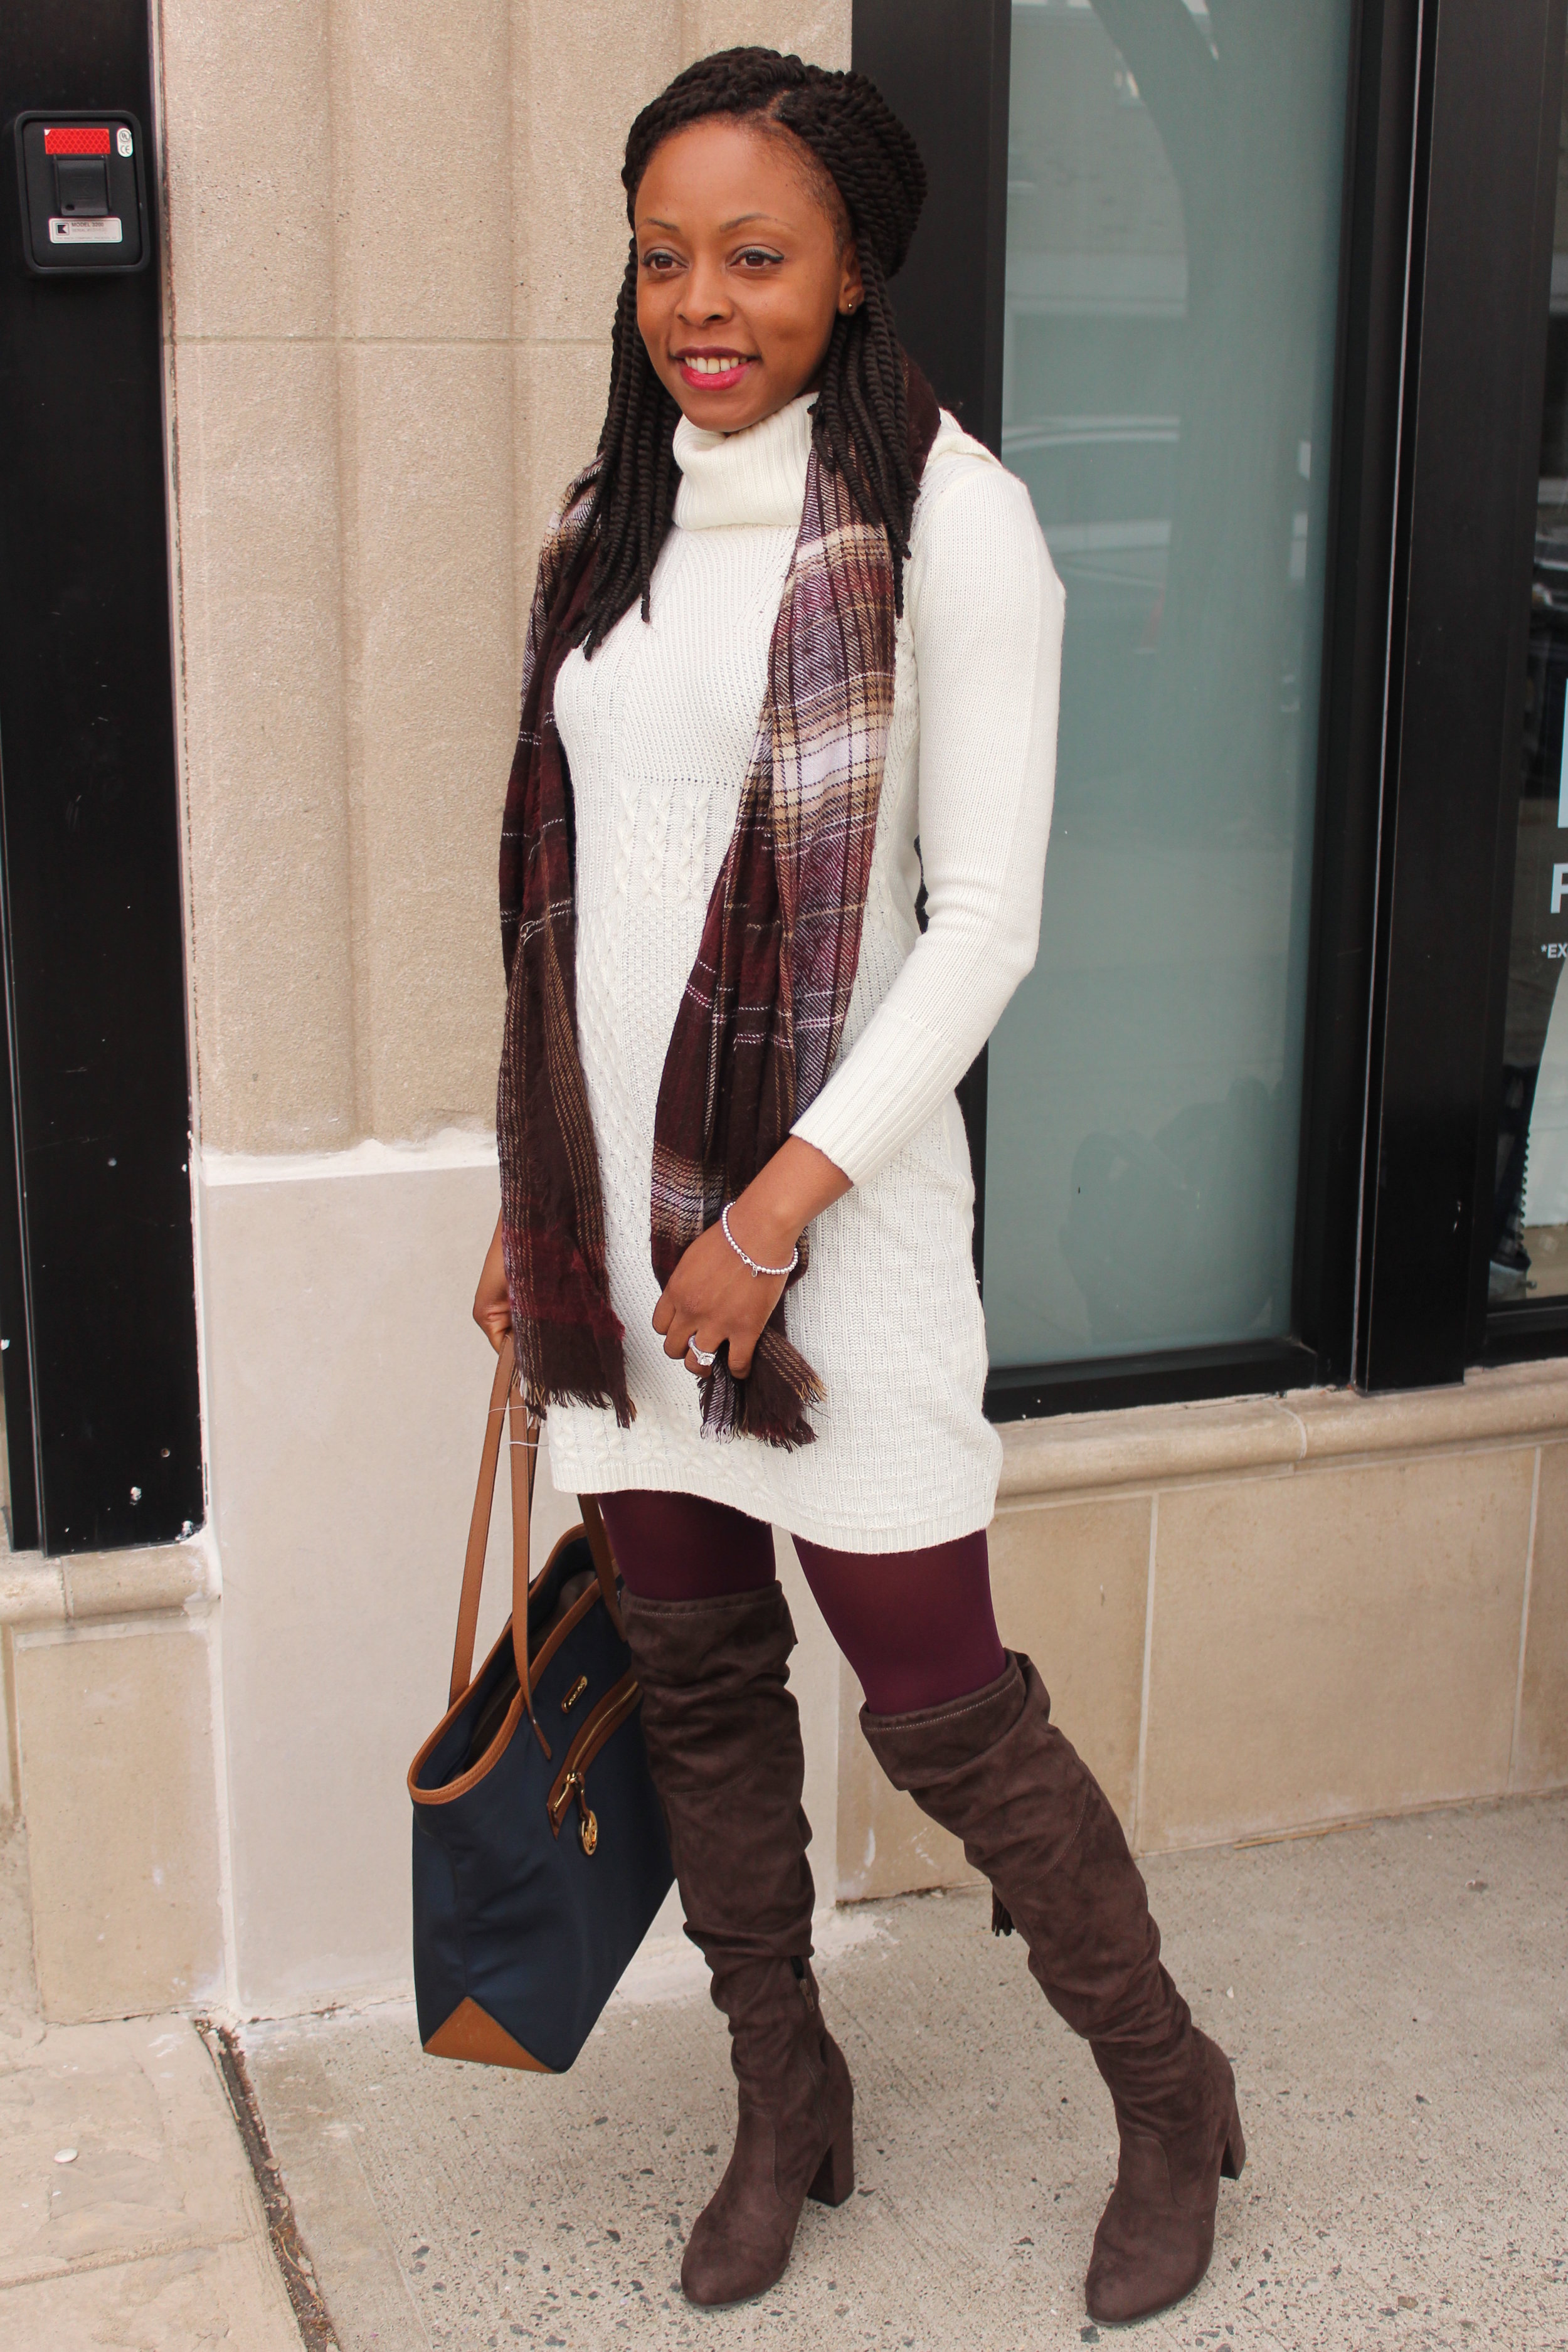 Oversized Sweater Dress with Knee High Boots